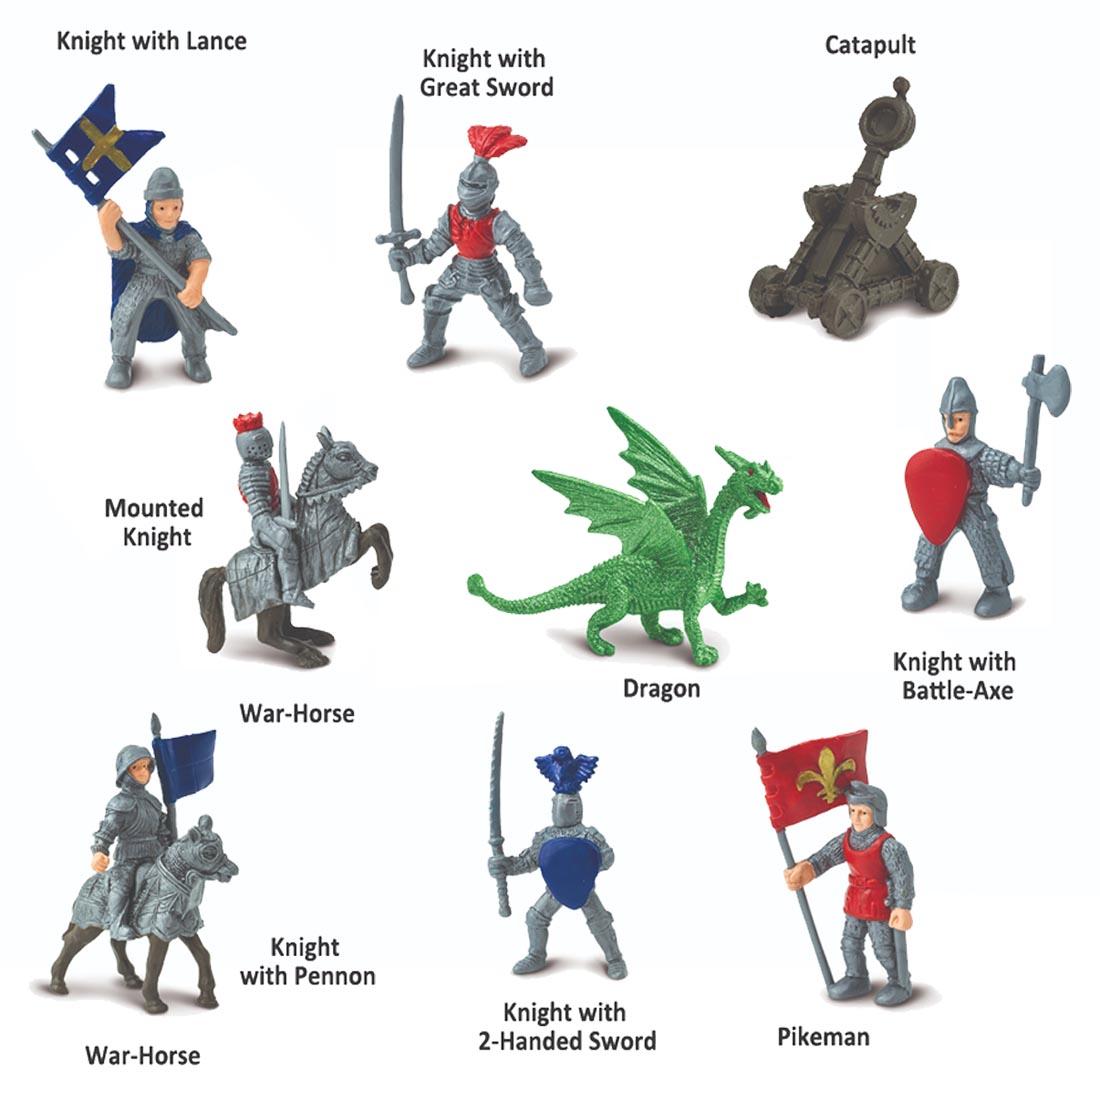 9 pieces from the Knights & Dragons Figurine Set labeled with their names